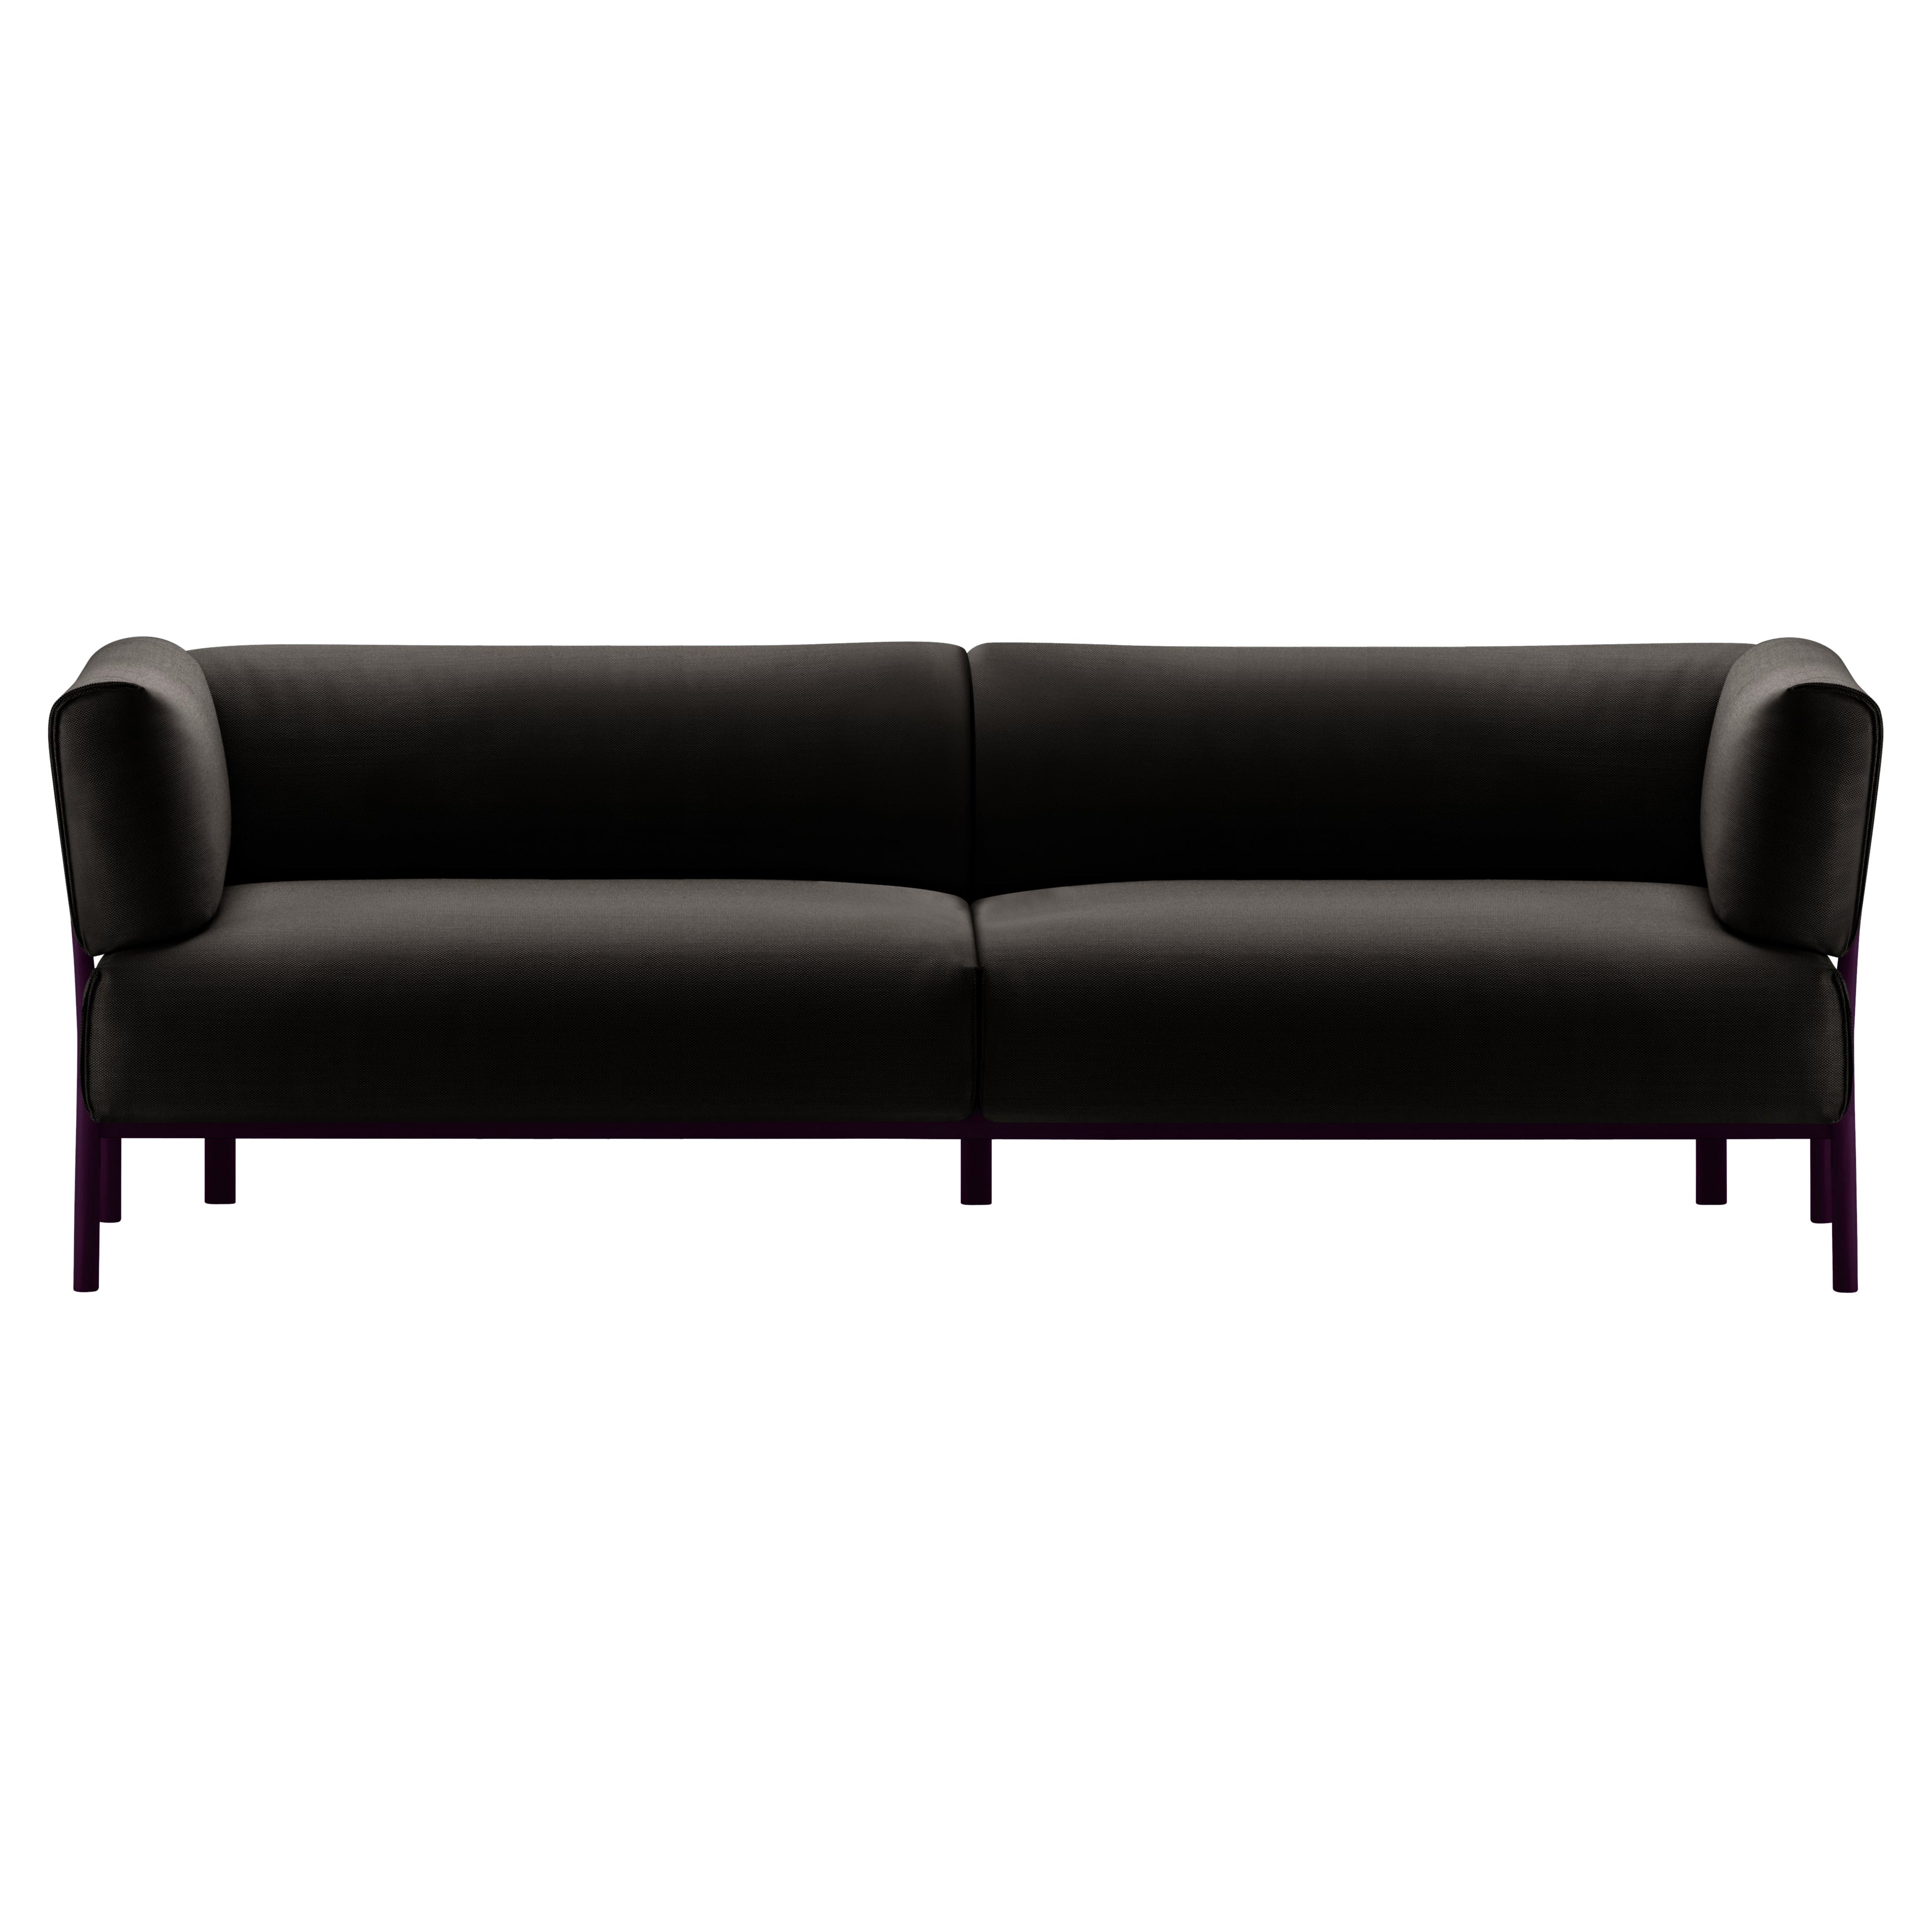 Alias 862 Eleven Sofa 3 Seater in Aubergine Seat and Lacquered Aluminum Frame For Sale